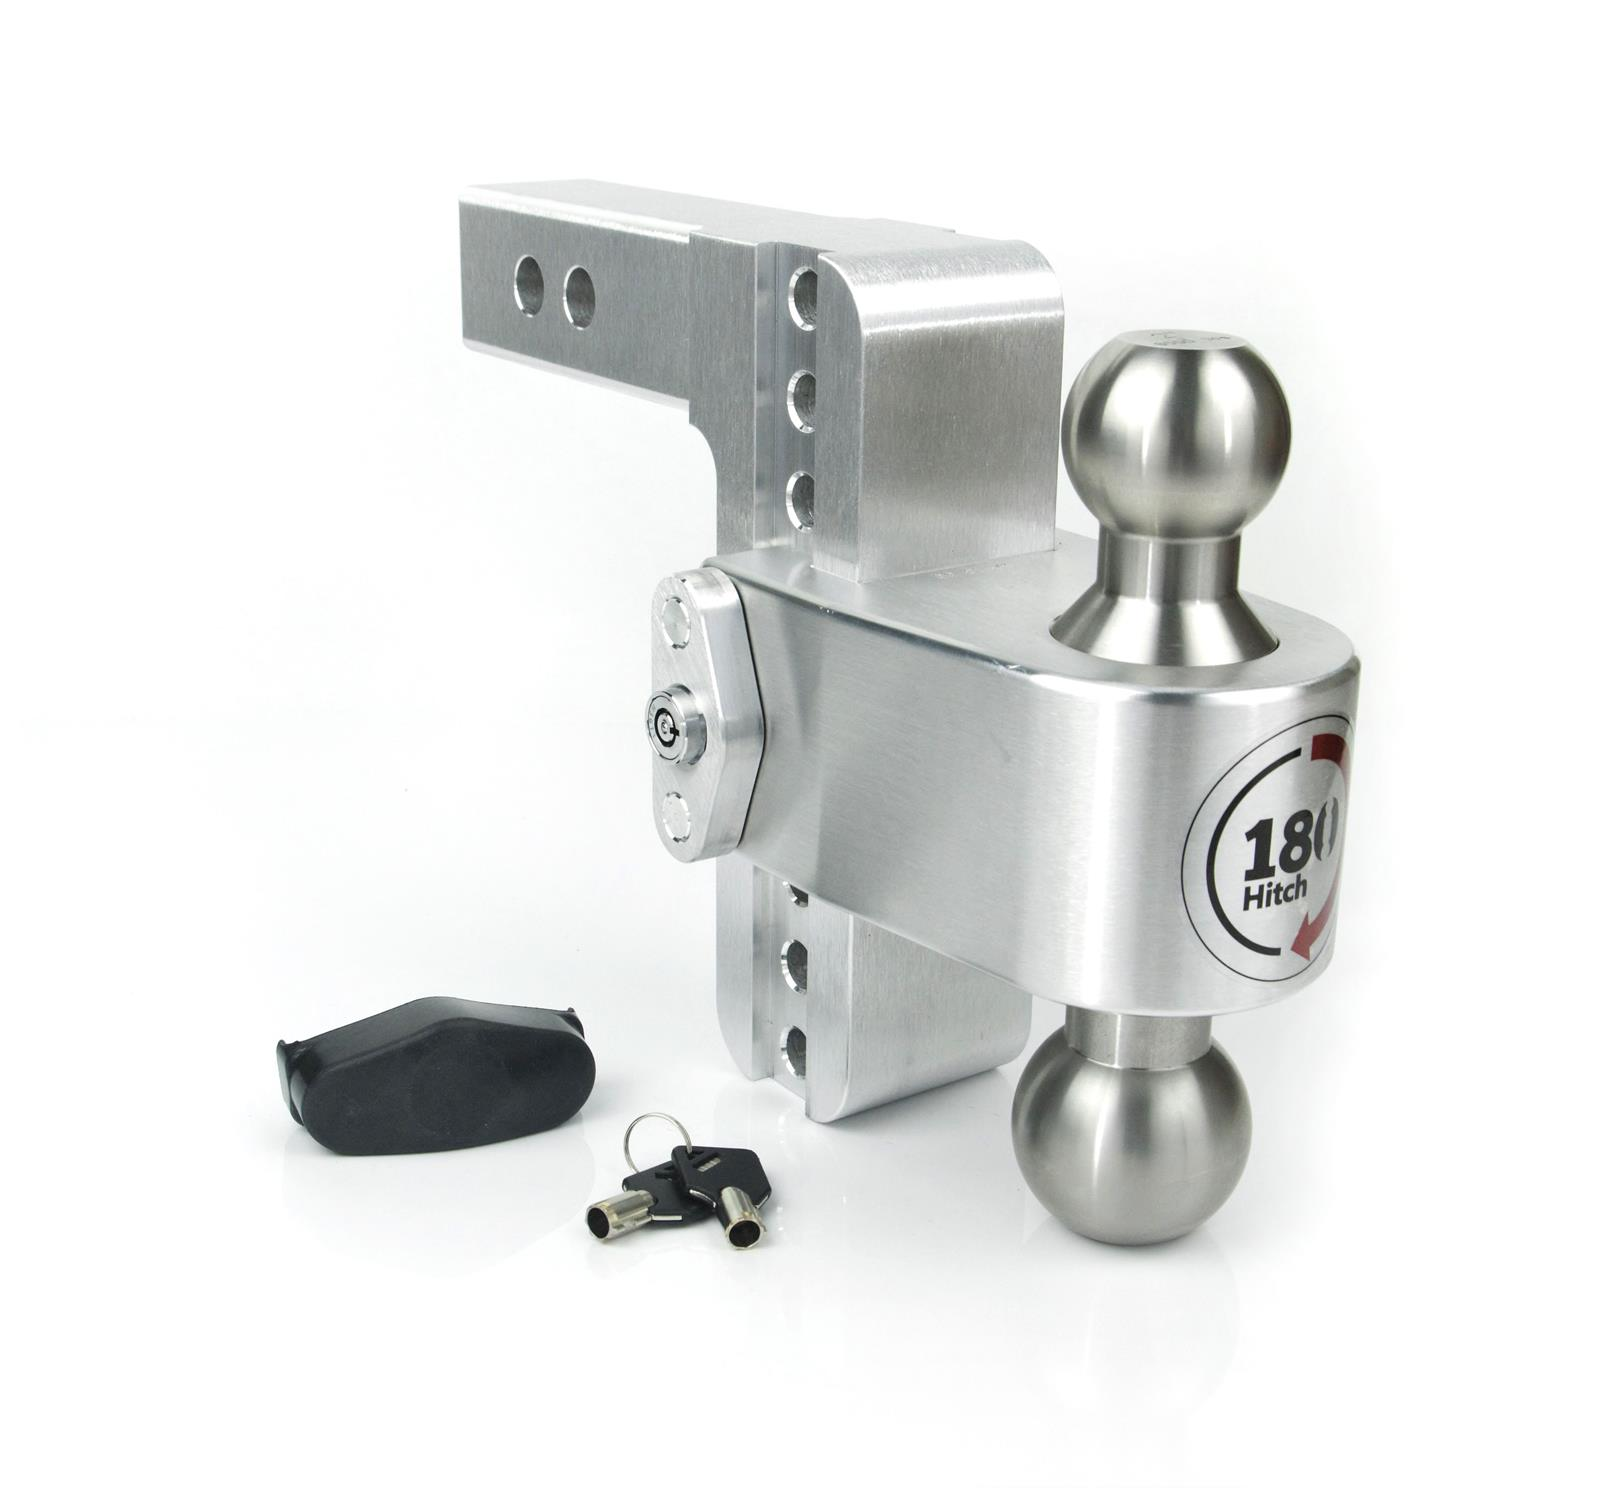 Weigh Safe LTB6-2 - Turnover Ball 6" Drop Hitch with 2" Shank